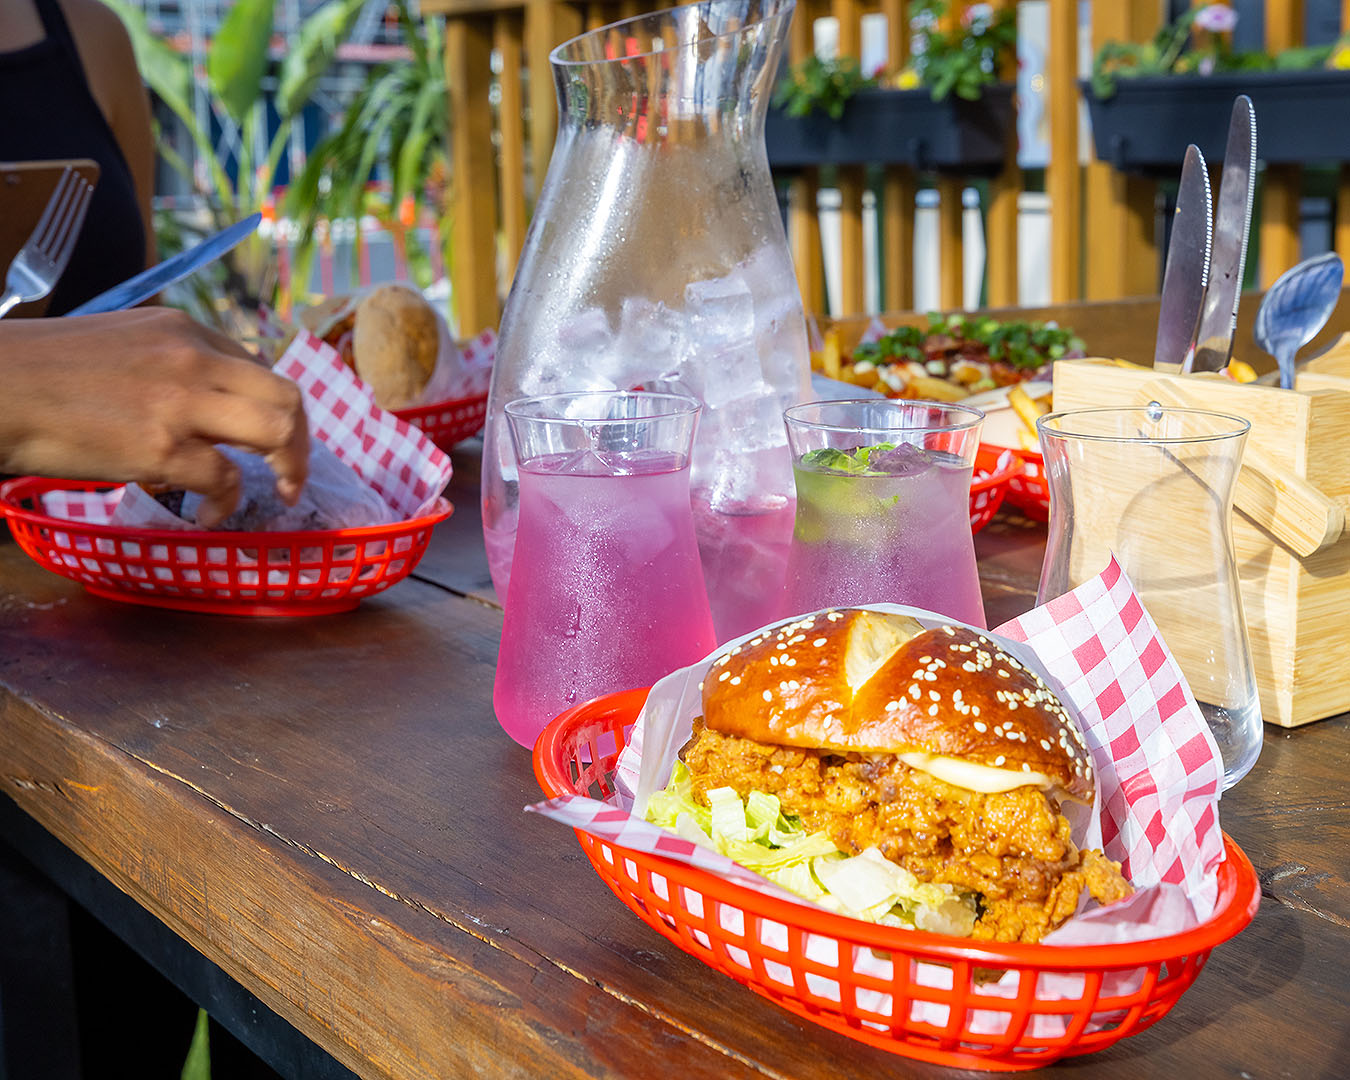 A burger sits in the foreground with a jug of cocktails standing behind it while someone tucks in.